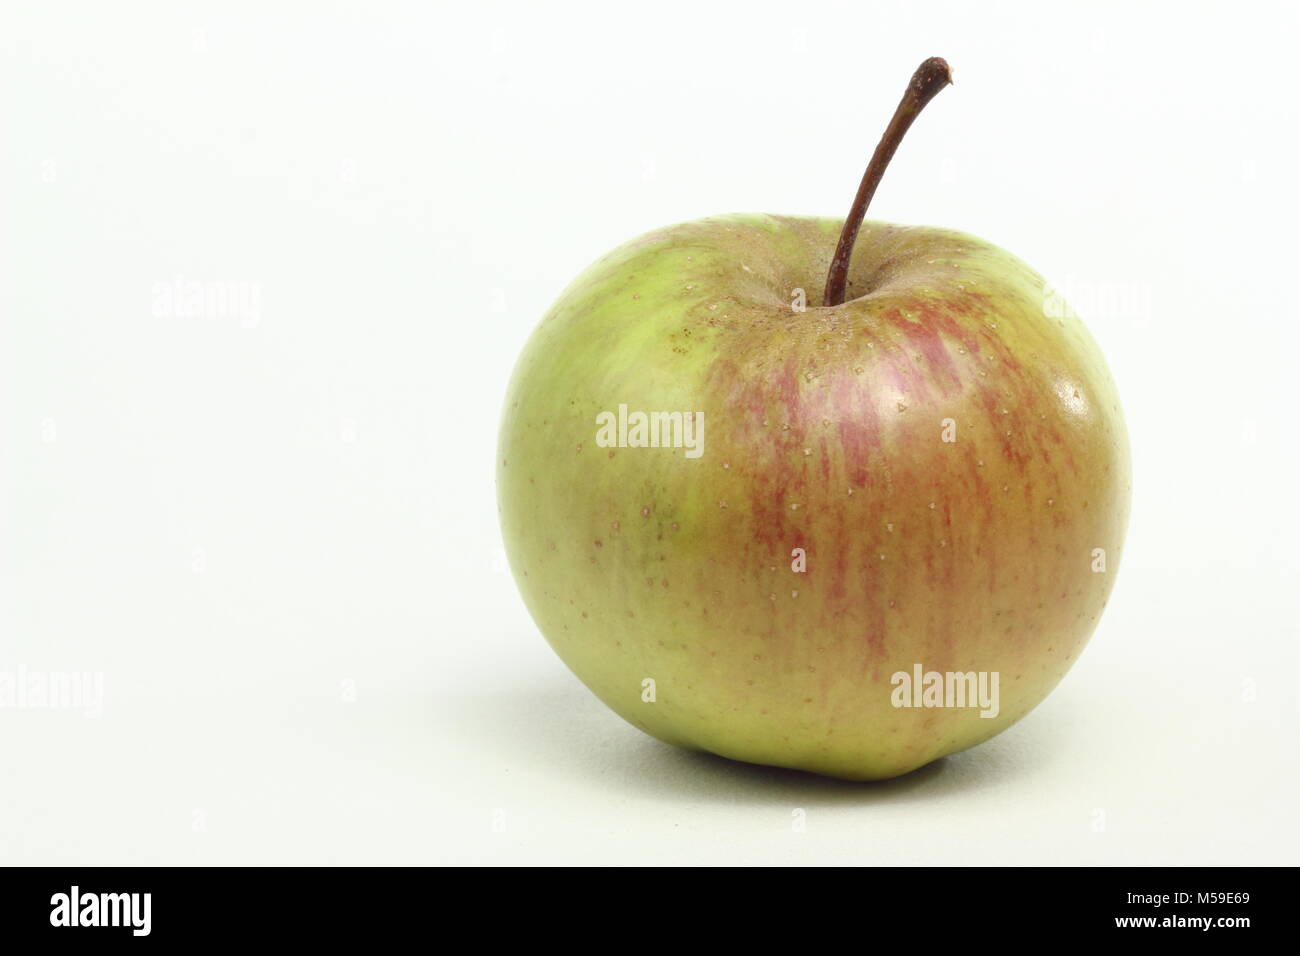 Malus domestica 'Lamb's Seedling', also called 'Langley Pippin', an heirloom English apple variety from Derbyshire, UK., white background. Stock Photo